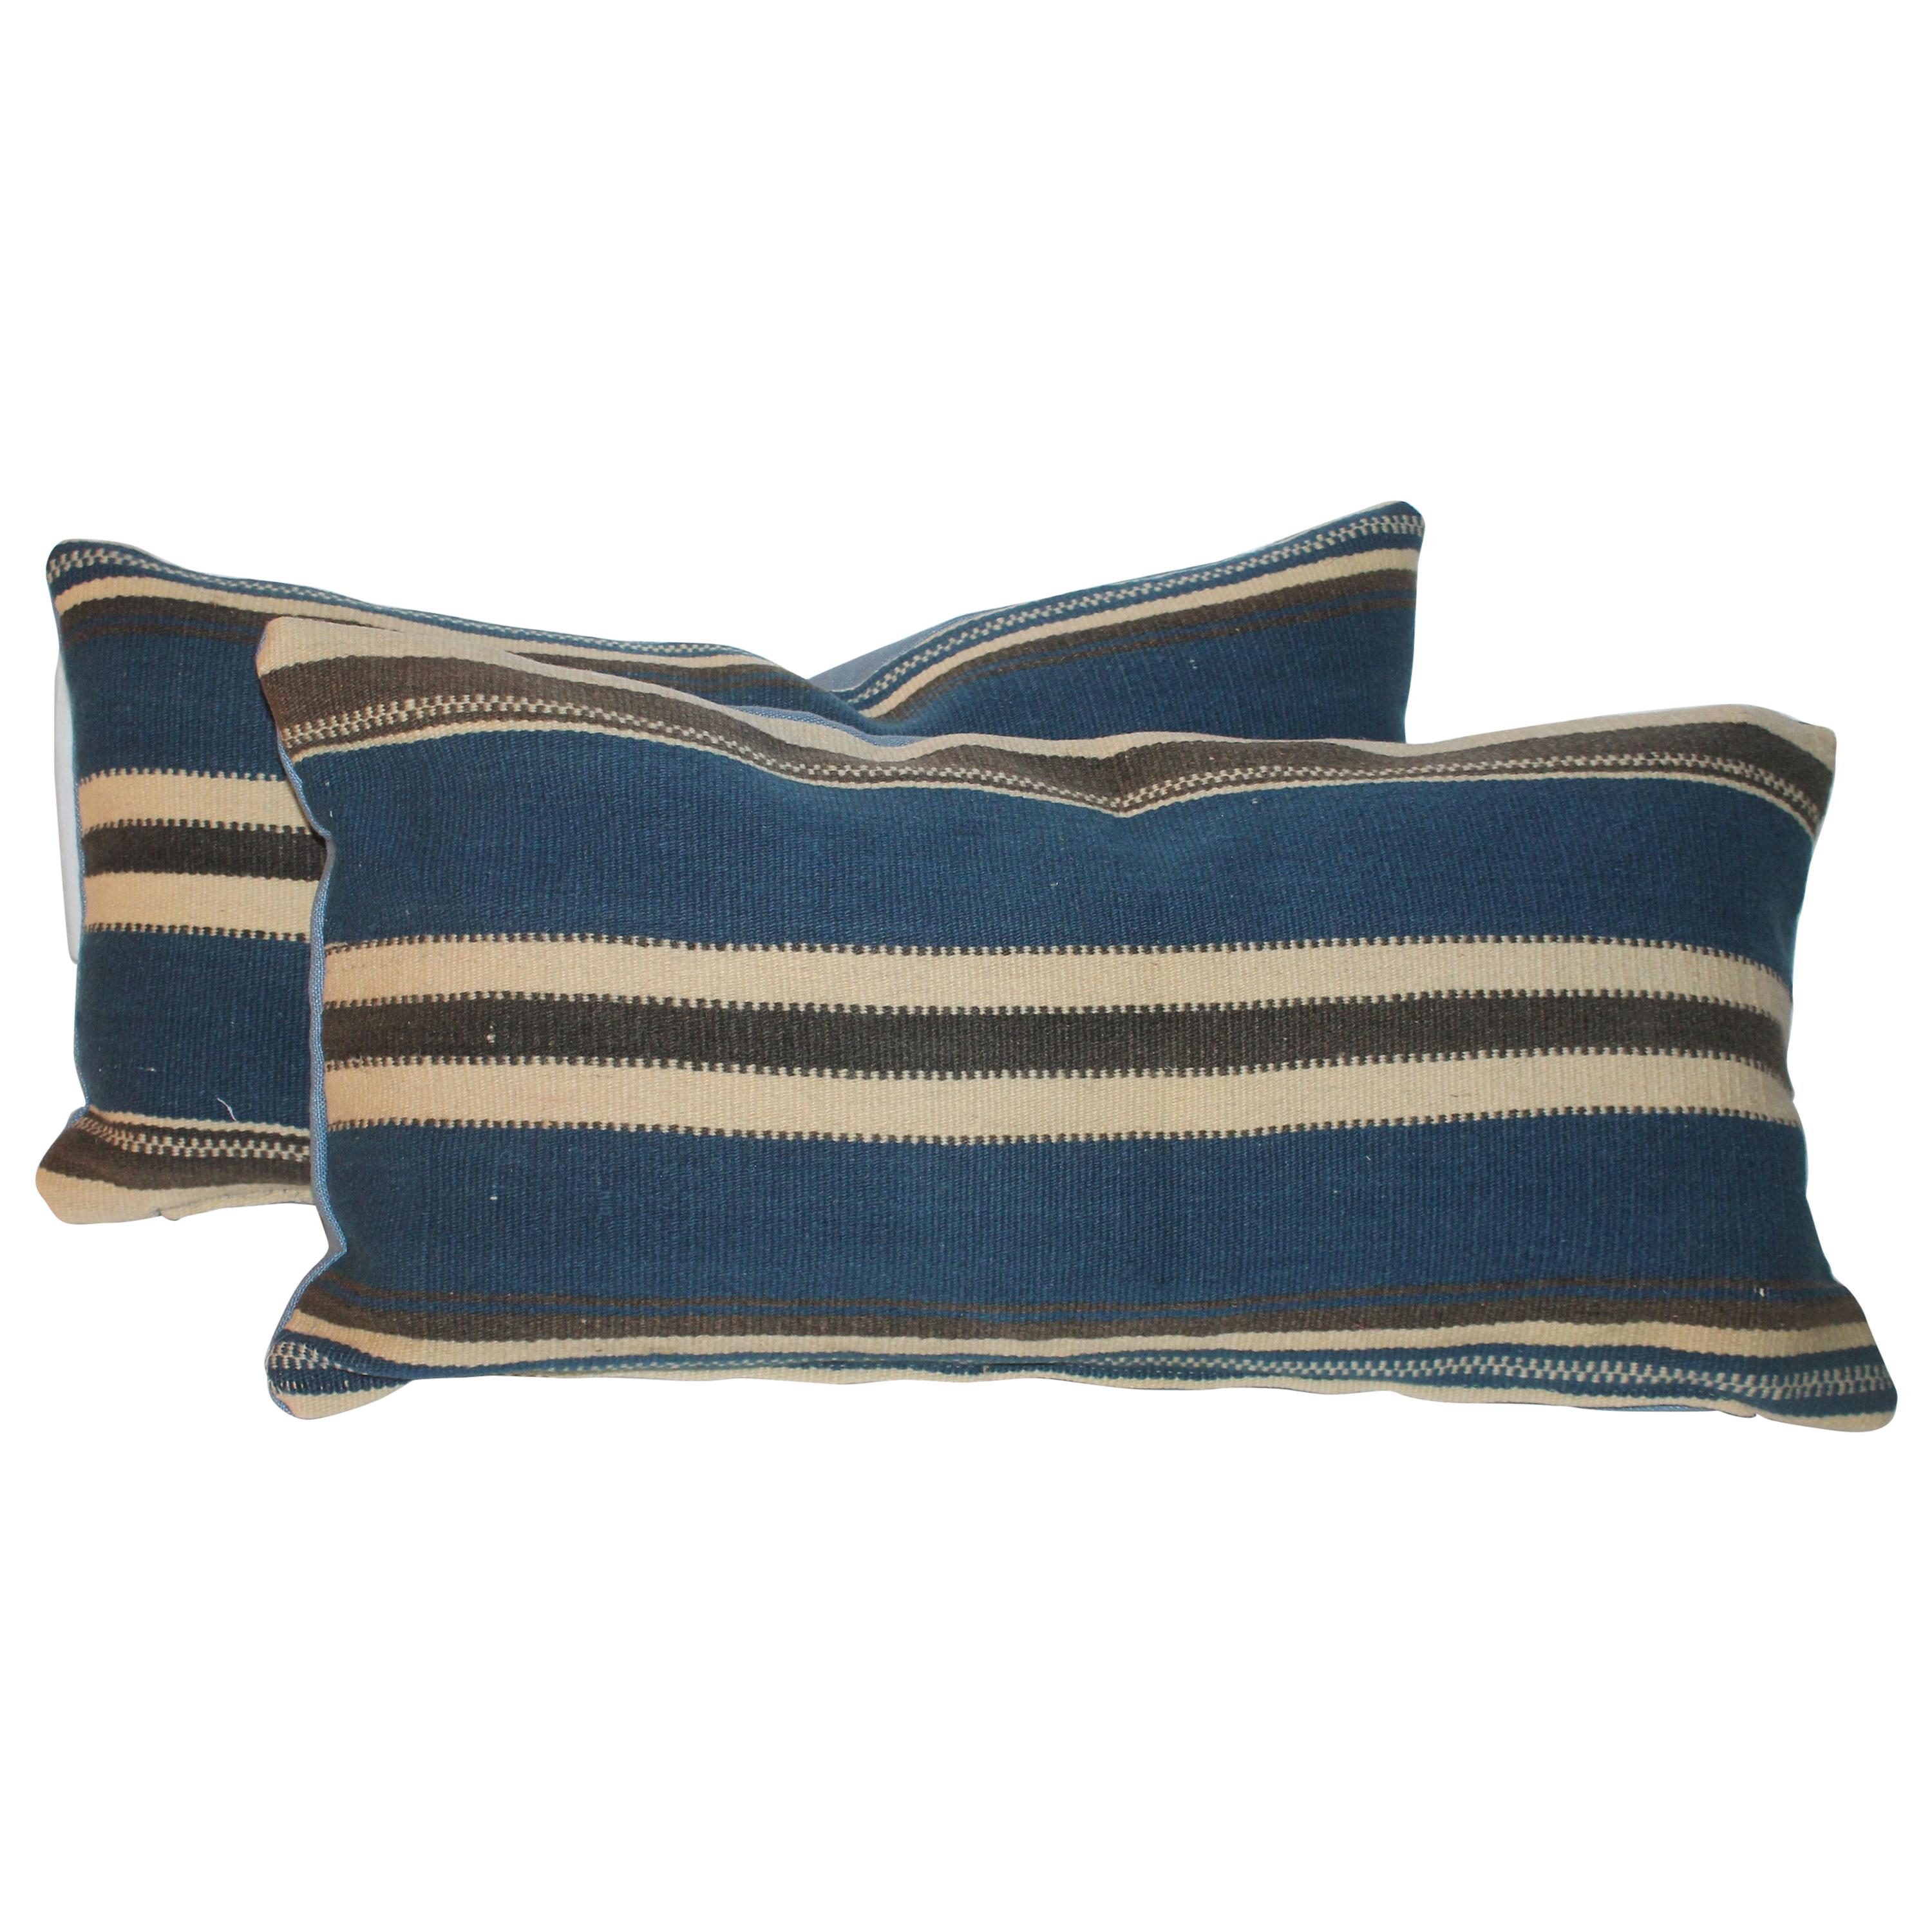 Tex Coco Mexican Indian Weaving Bolster Pillows, Pair For Sale